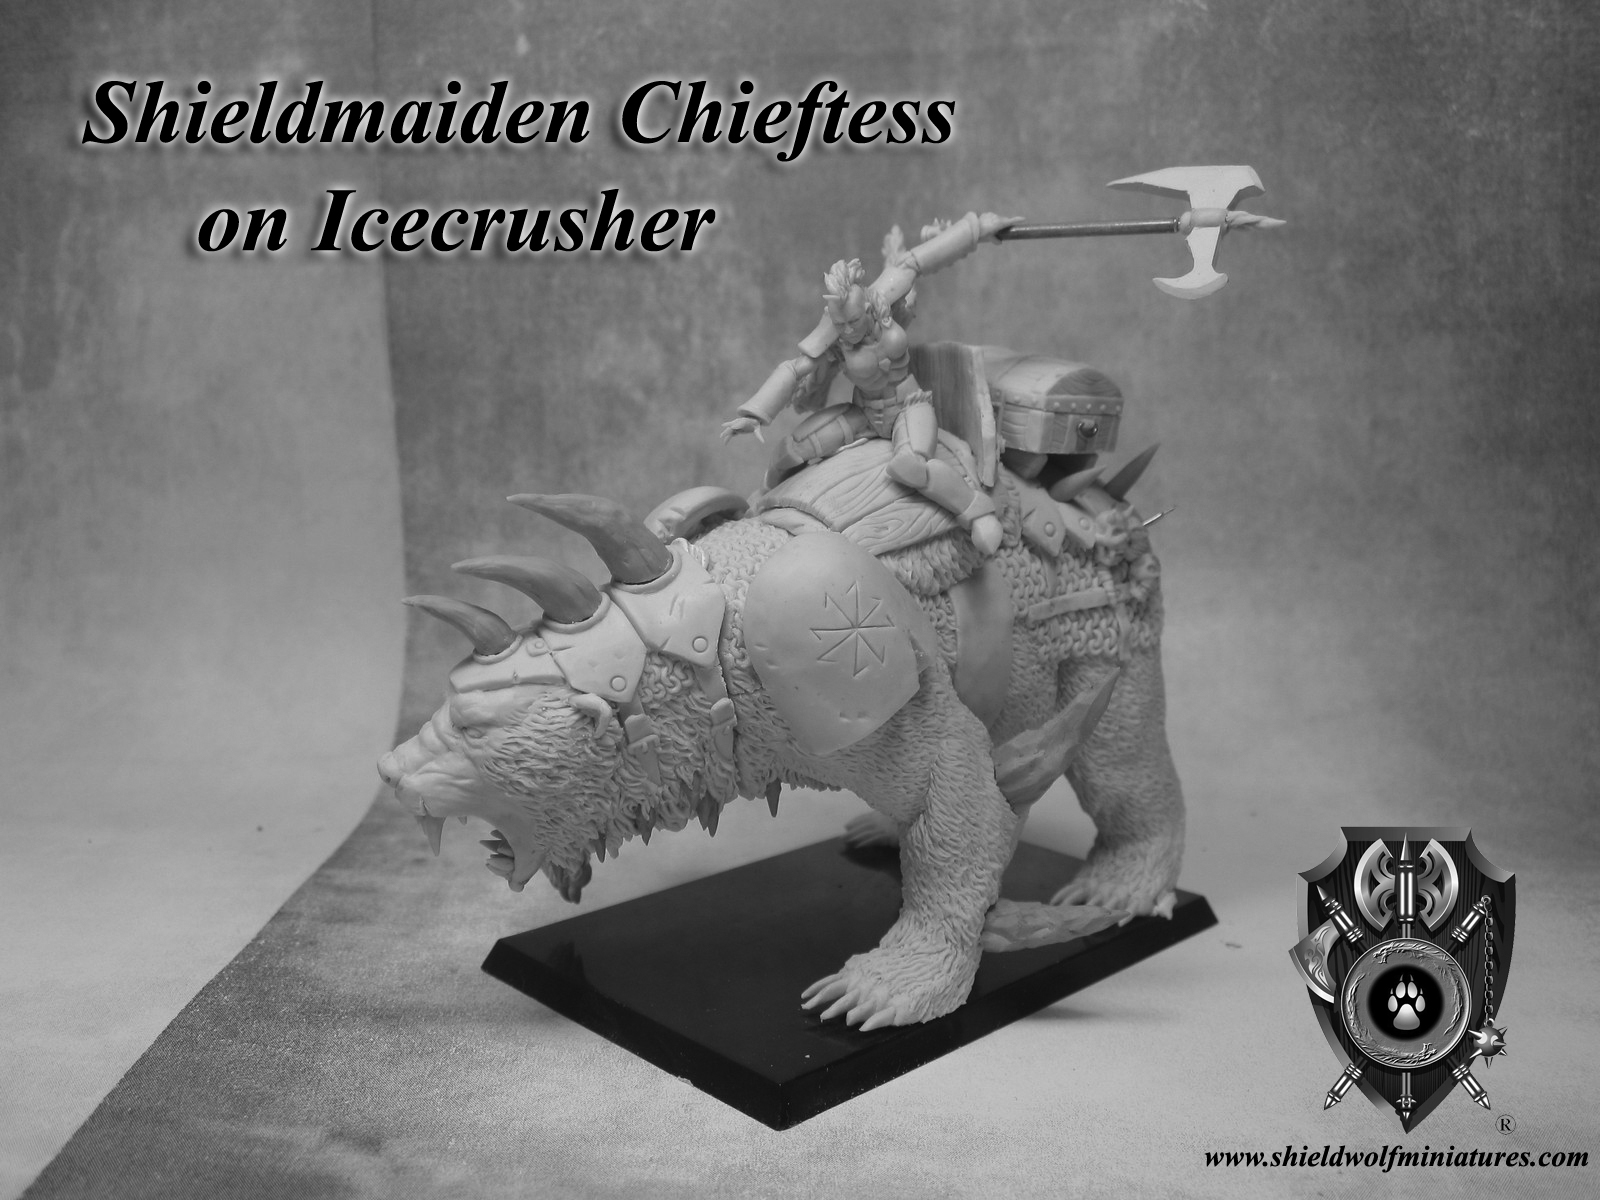 shieldmaiden-chieftess-on-icecrusher-front-view-by-shieldwolf-miniatures